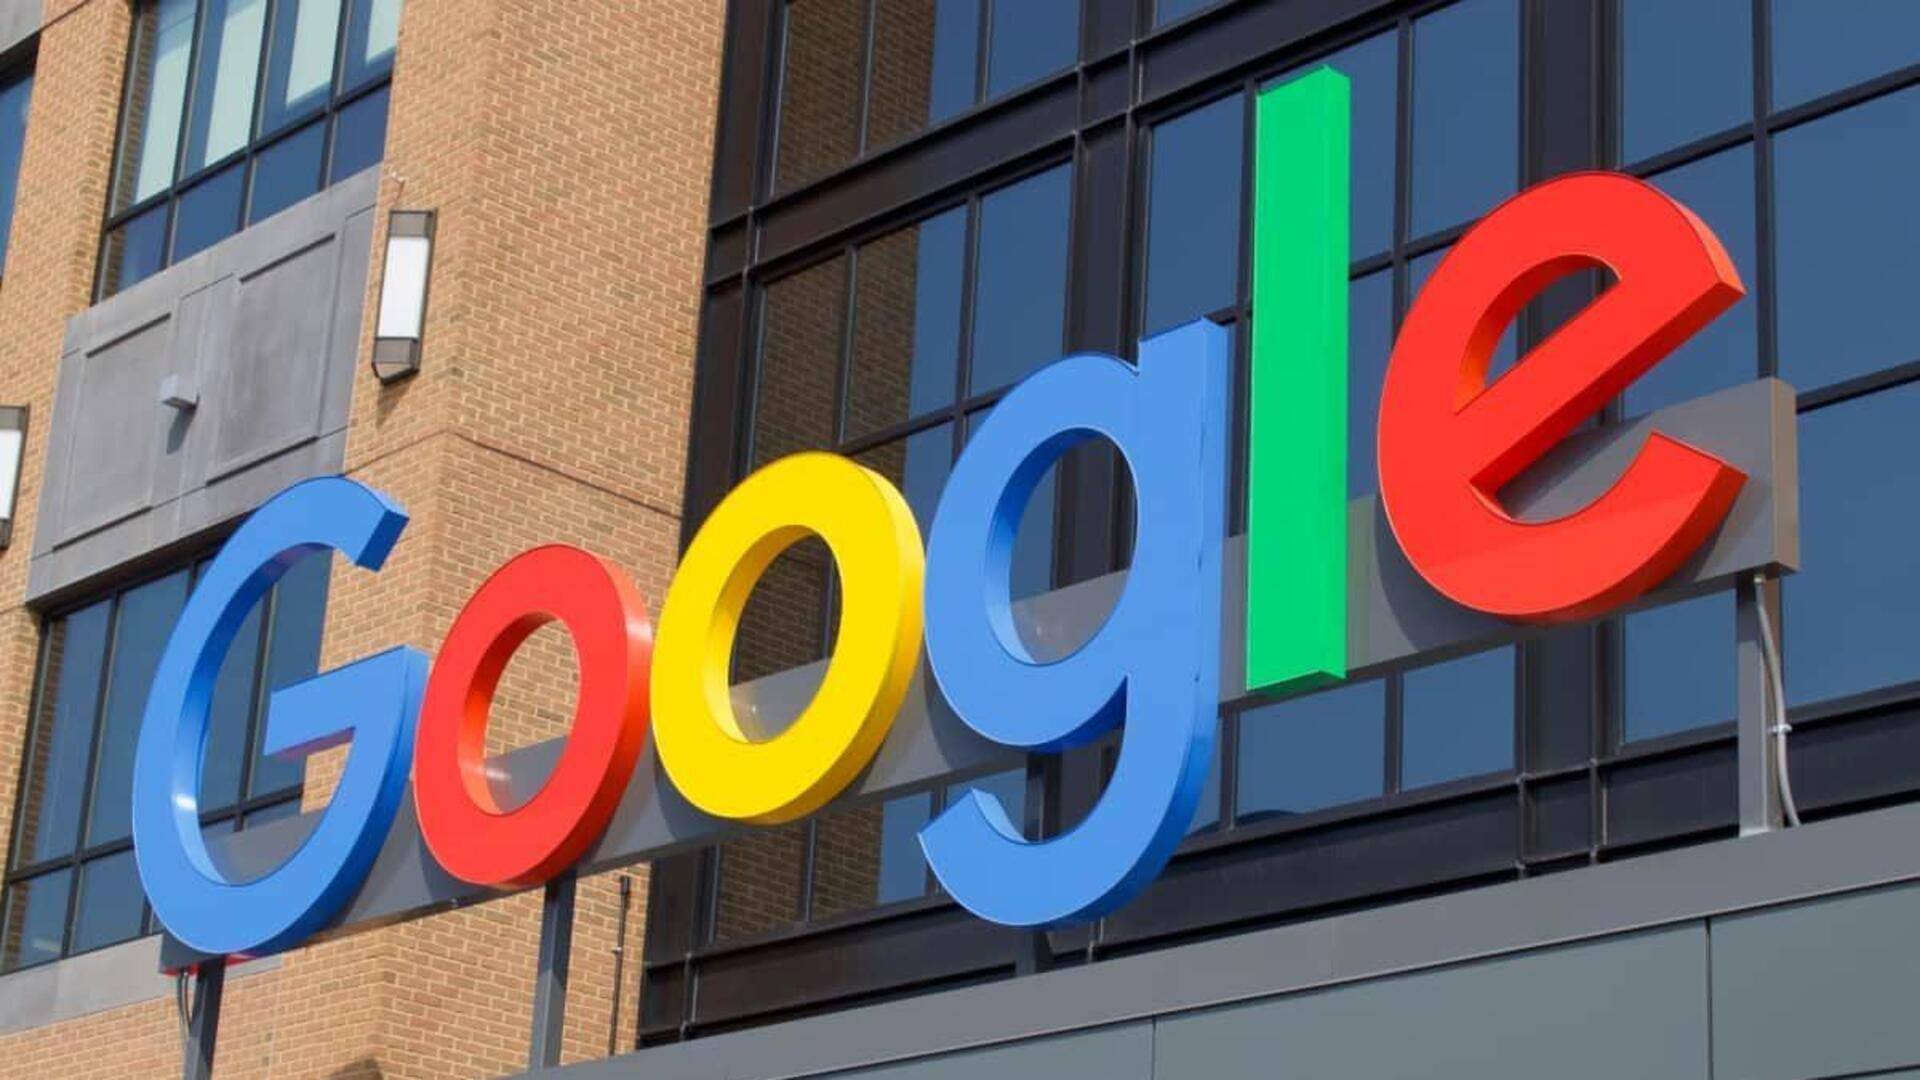 Google announces layoffs in Python, Dart, and Flutter divisions